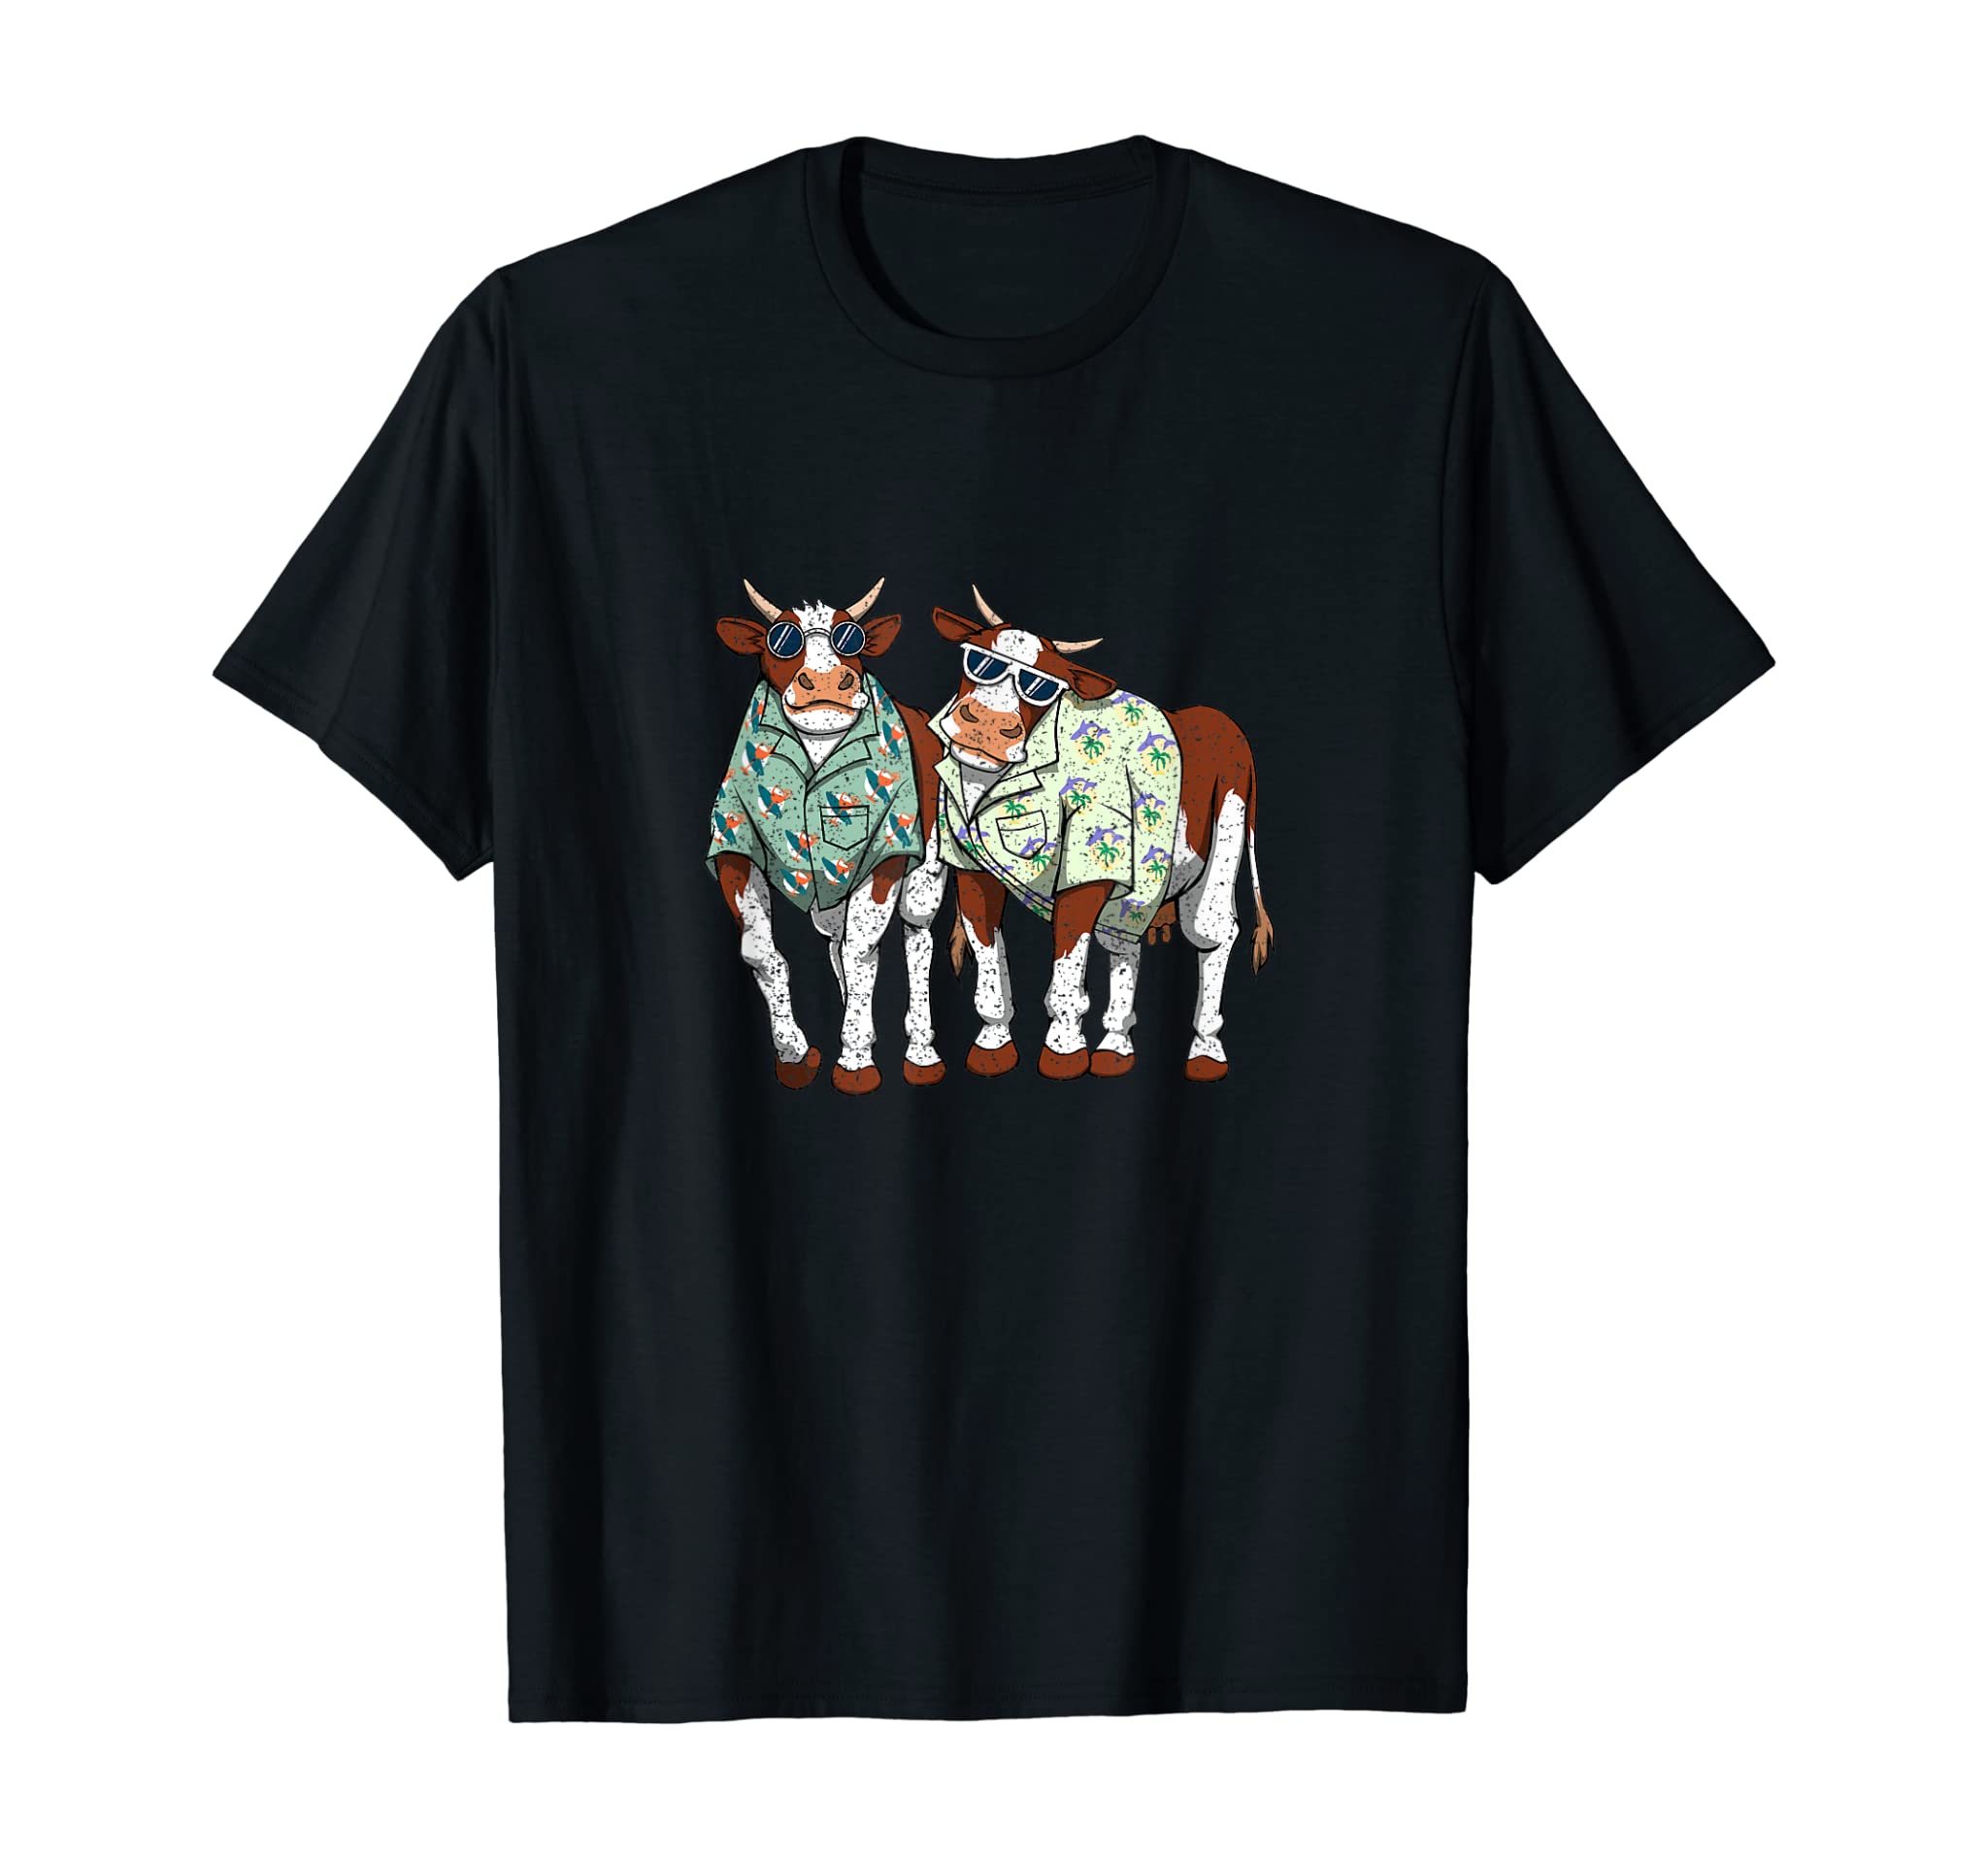 Vintage Cow Party for Birthday. Cattle Farm Women and Cows T-Shirt